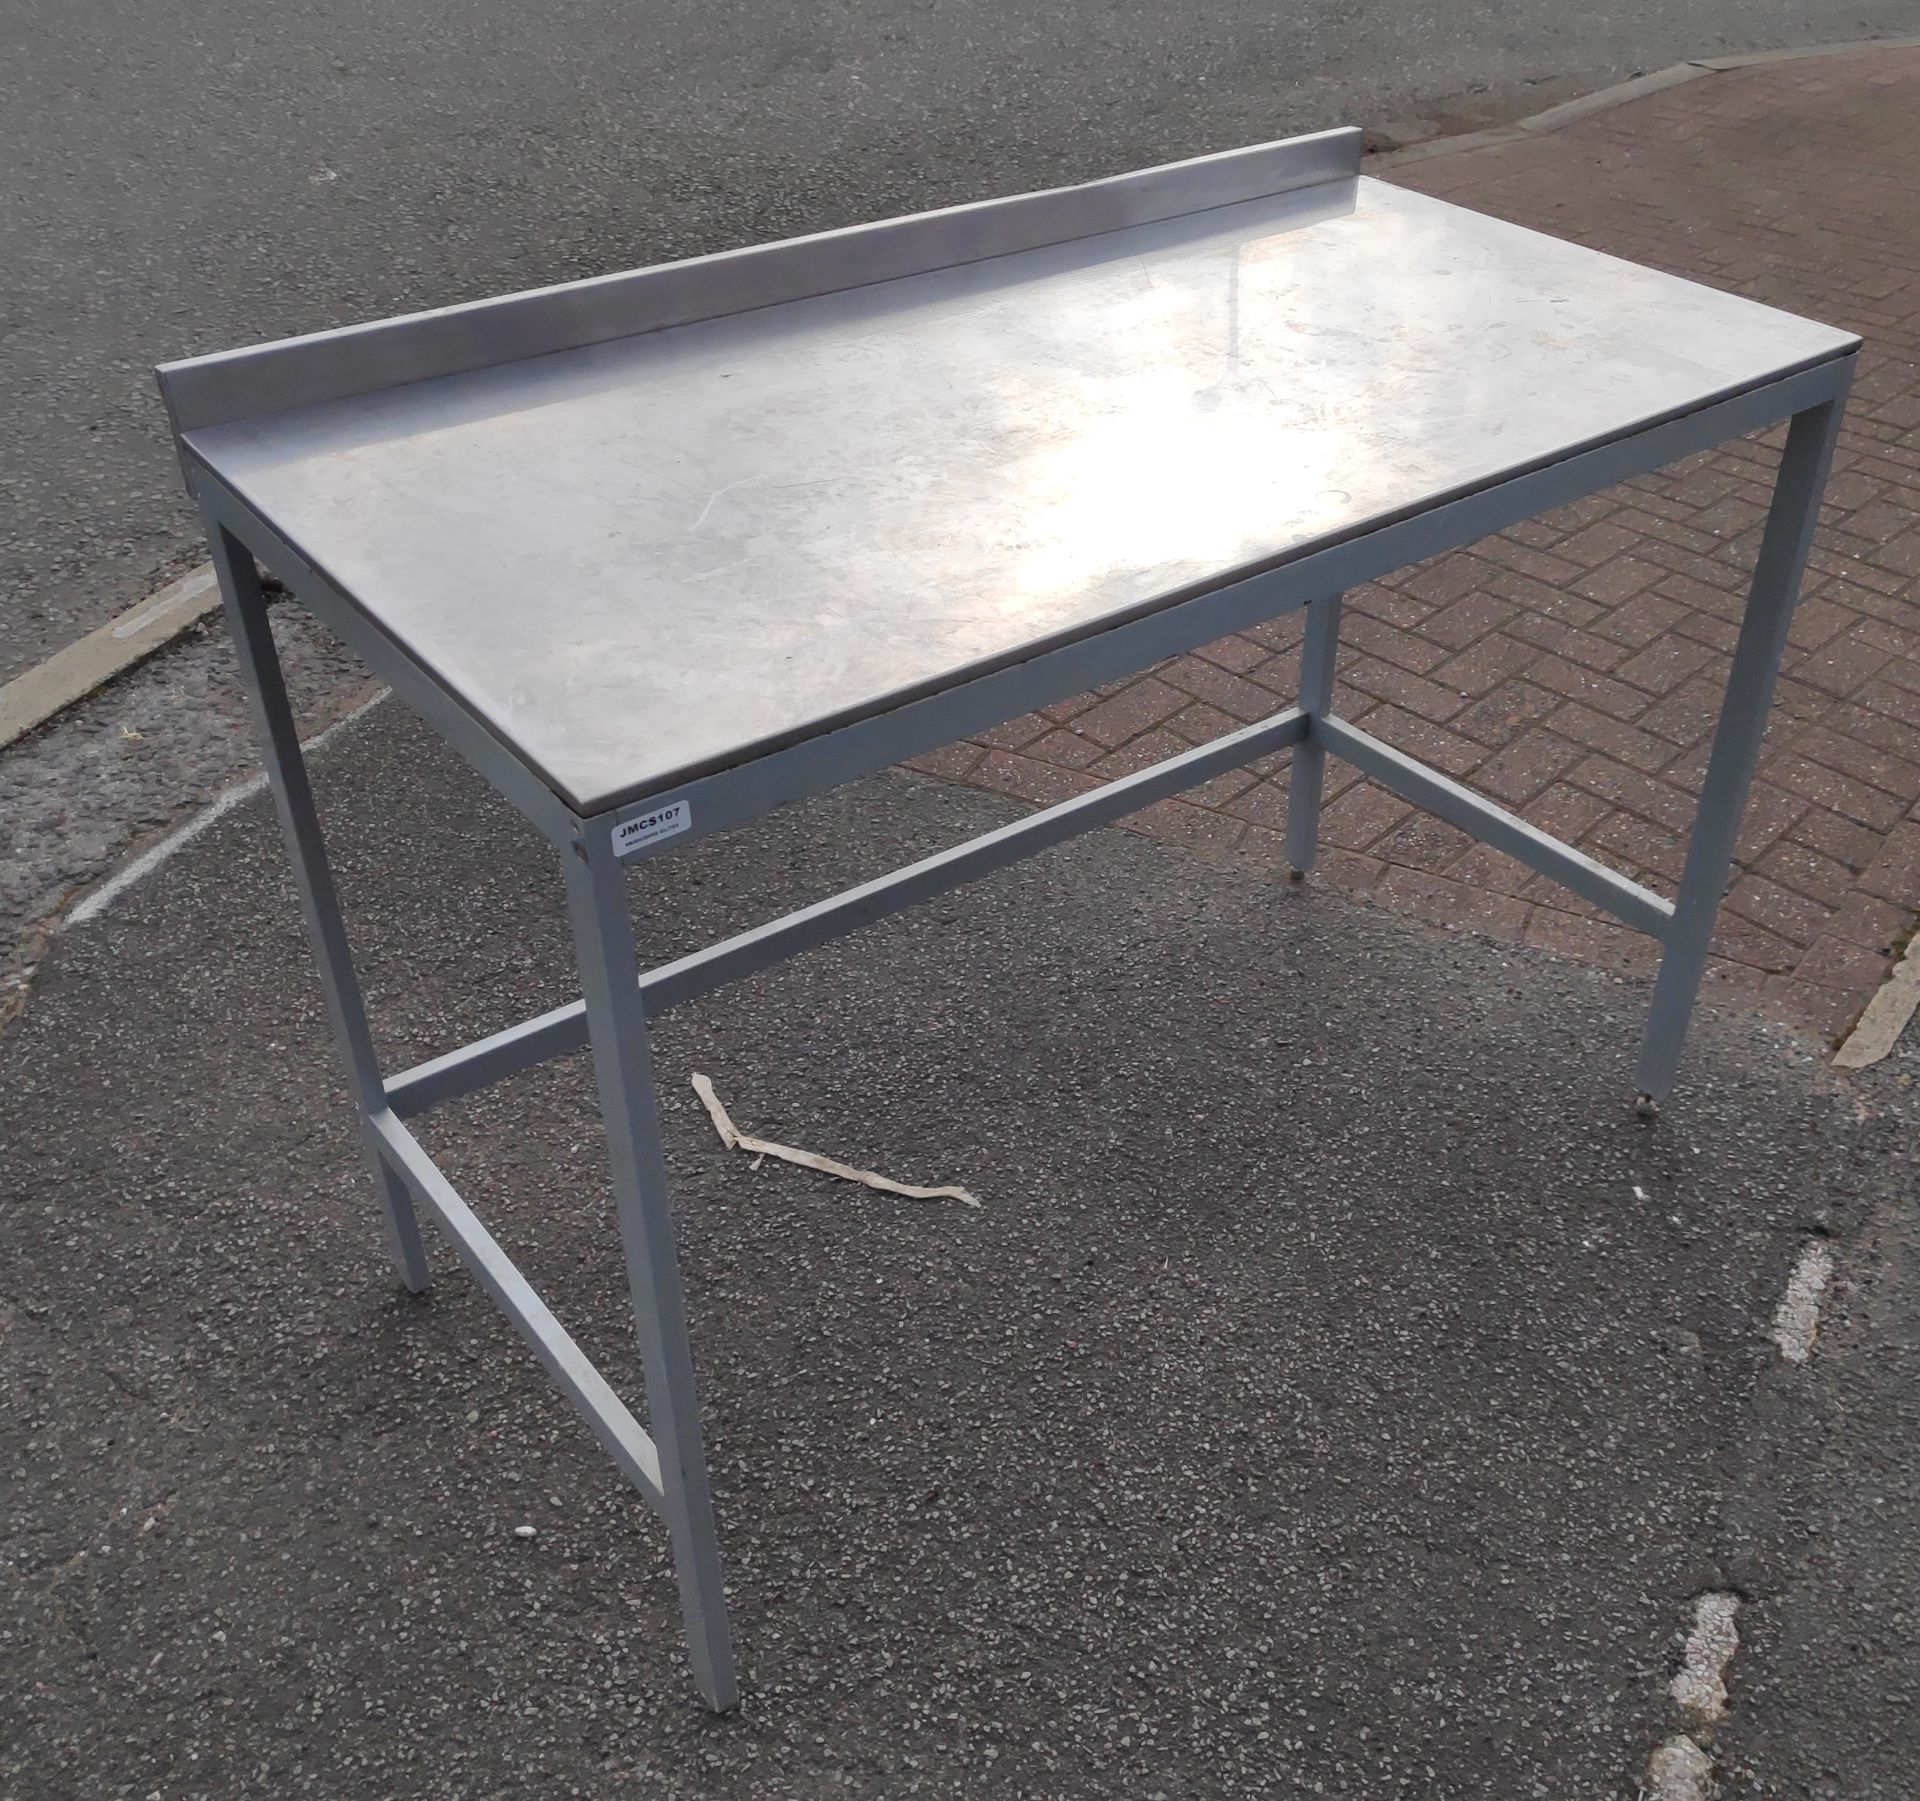 1 x Stainless Steel Prep Bench with Upstand - 126cm (L) x 64.5cm (D) x 95cm (H) - JMCS107 - CL723 - - Image 6 of 7